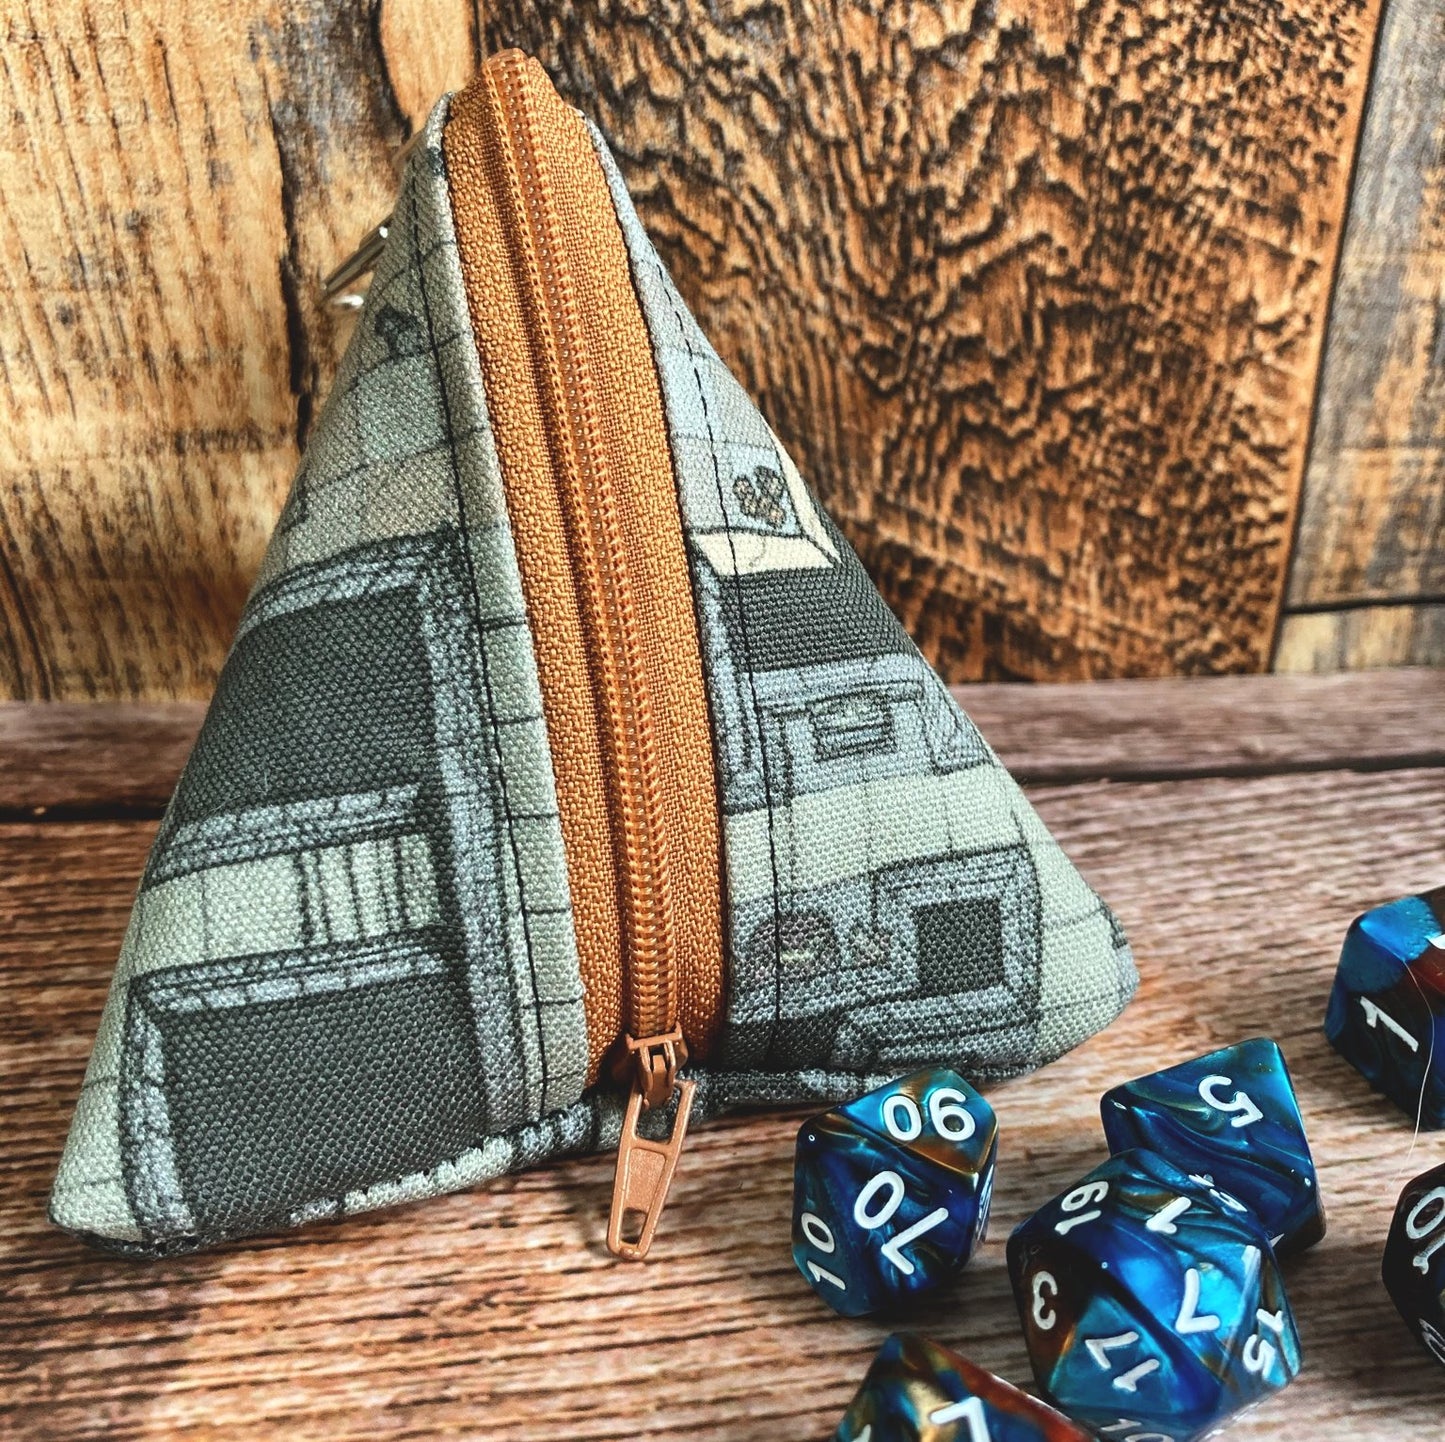 4 Sided Pyramid Dice and Trinket Bag